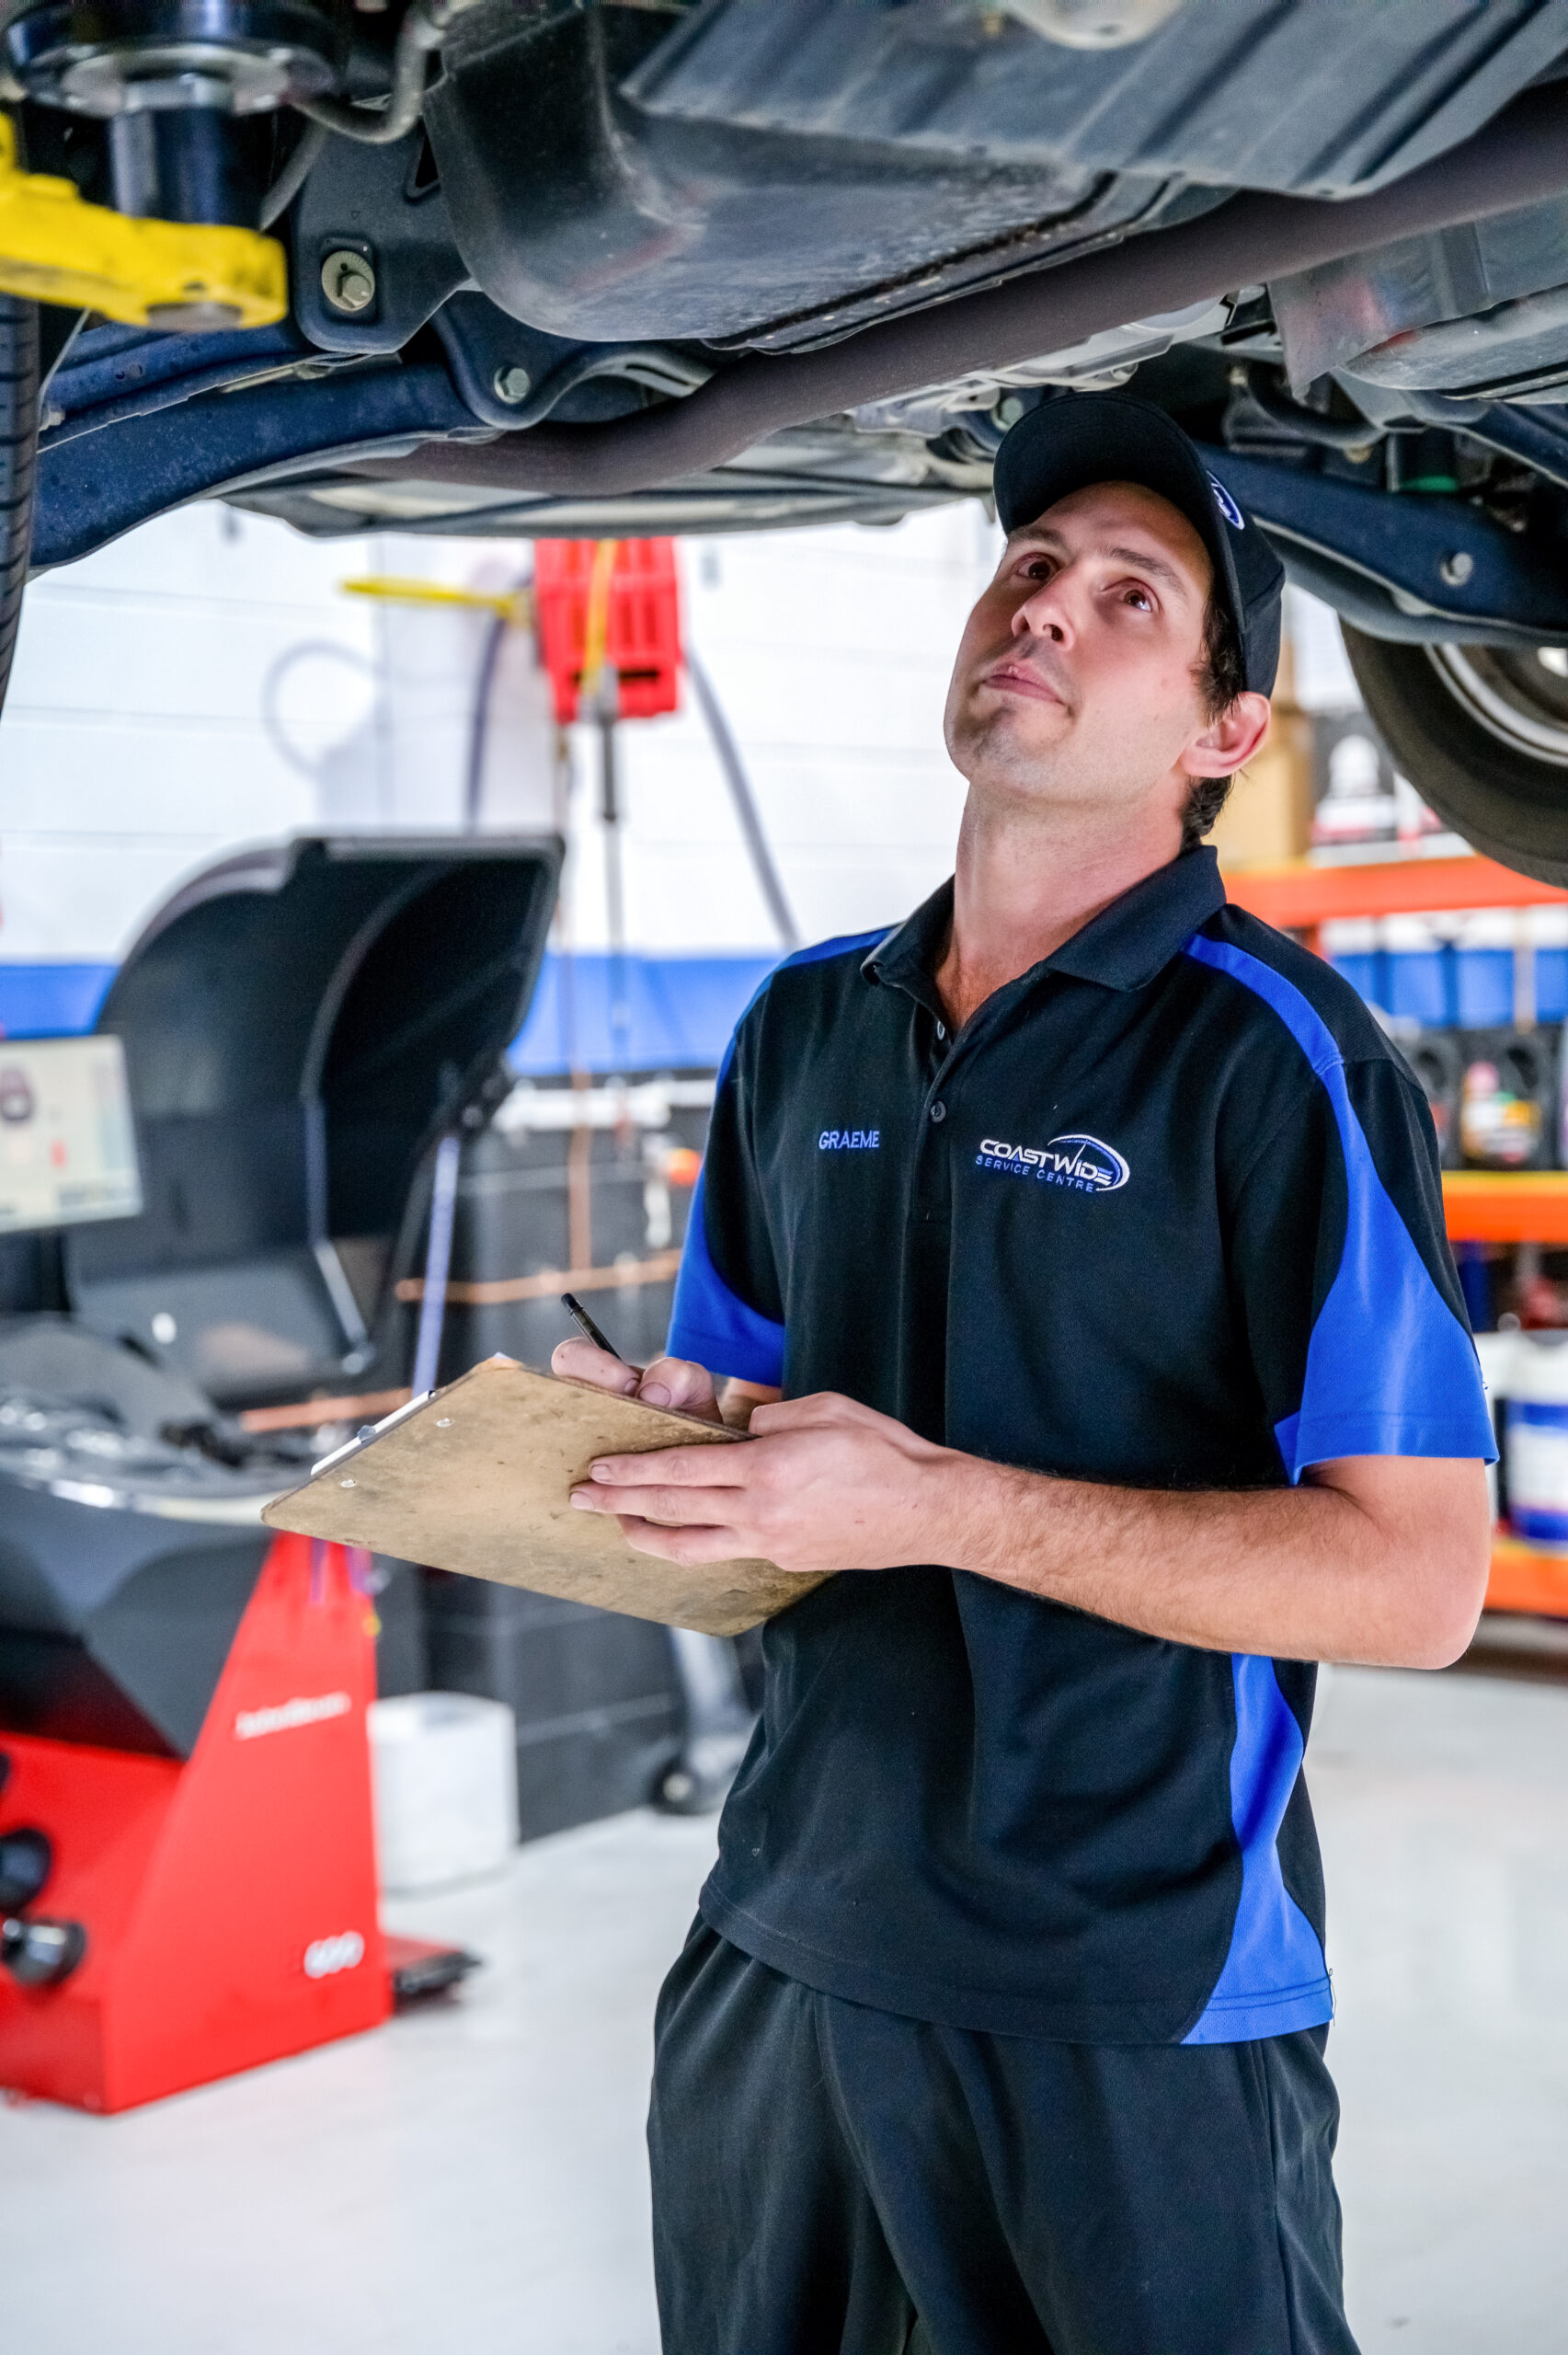 Coastwide Service Centre car mechanic evaluating the car's condition for roadworthy certificate qld and logbook service